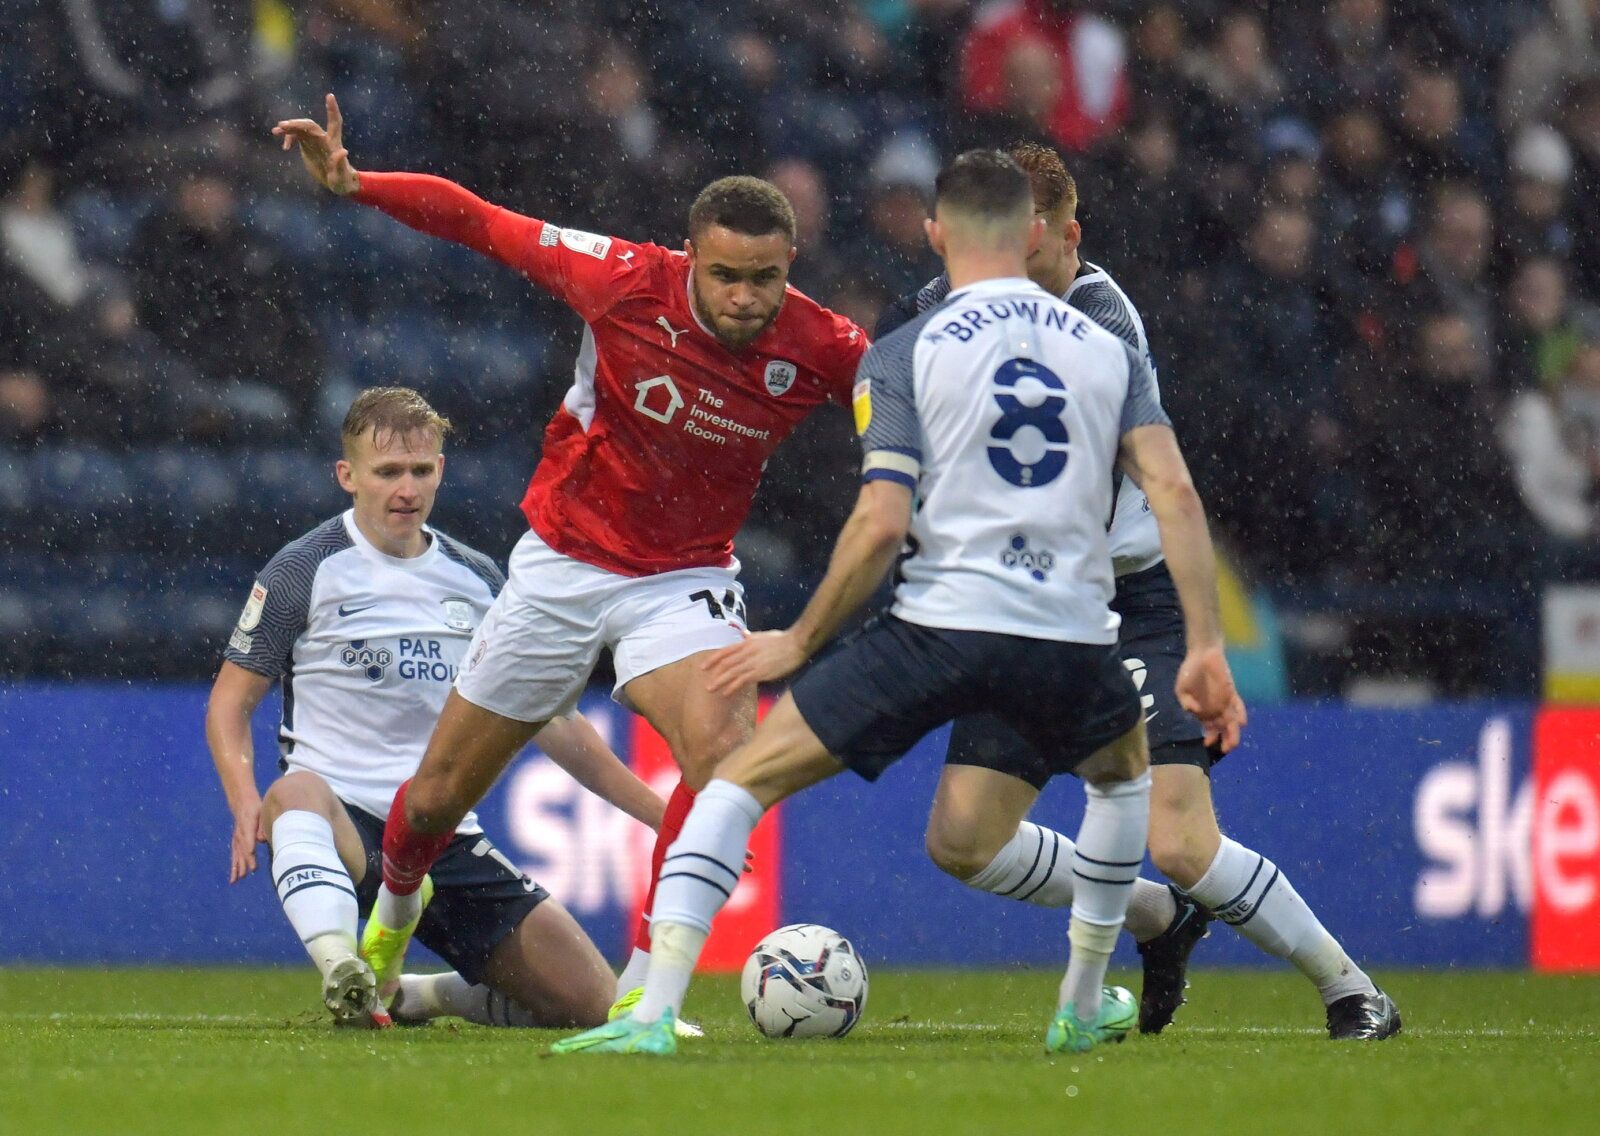 Soccer Football - Championship - Preston North End v Barnsley - Deepdale, Preston, Britain - December 11, 2021  Barnsley's Carlton Morris in action   Action Images/Paul Burrows  EDITORIAL USE ONLY. No use with unauthorized audio, video, data, fixture lists, club/league logos or 